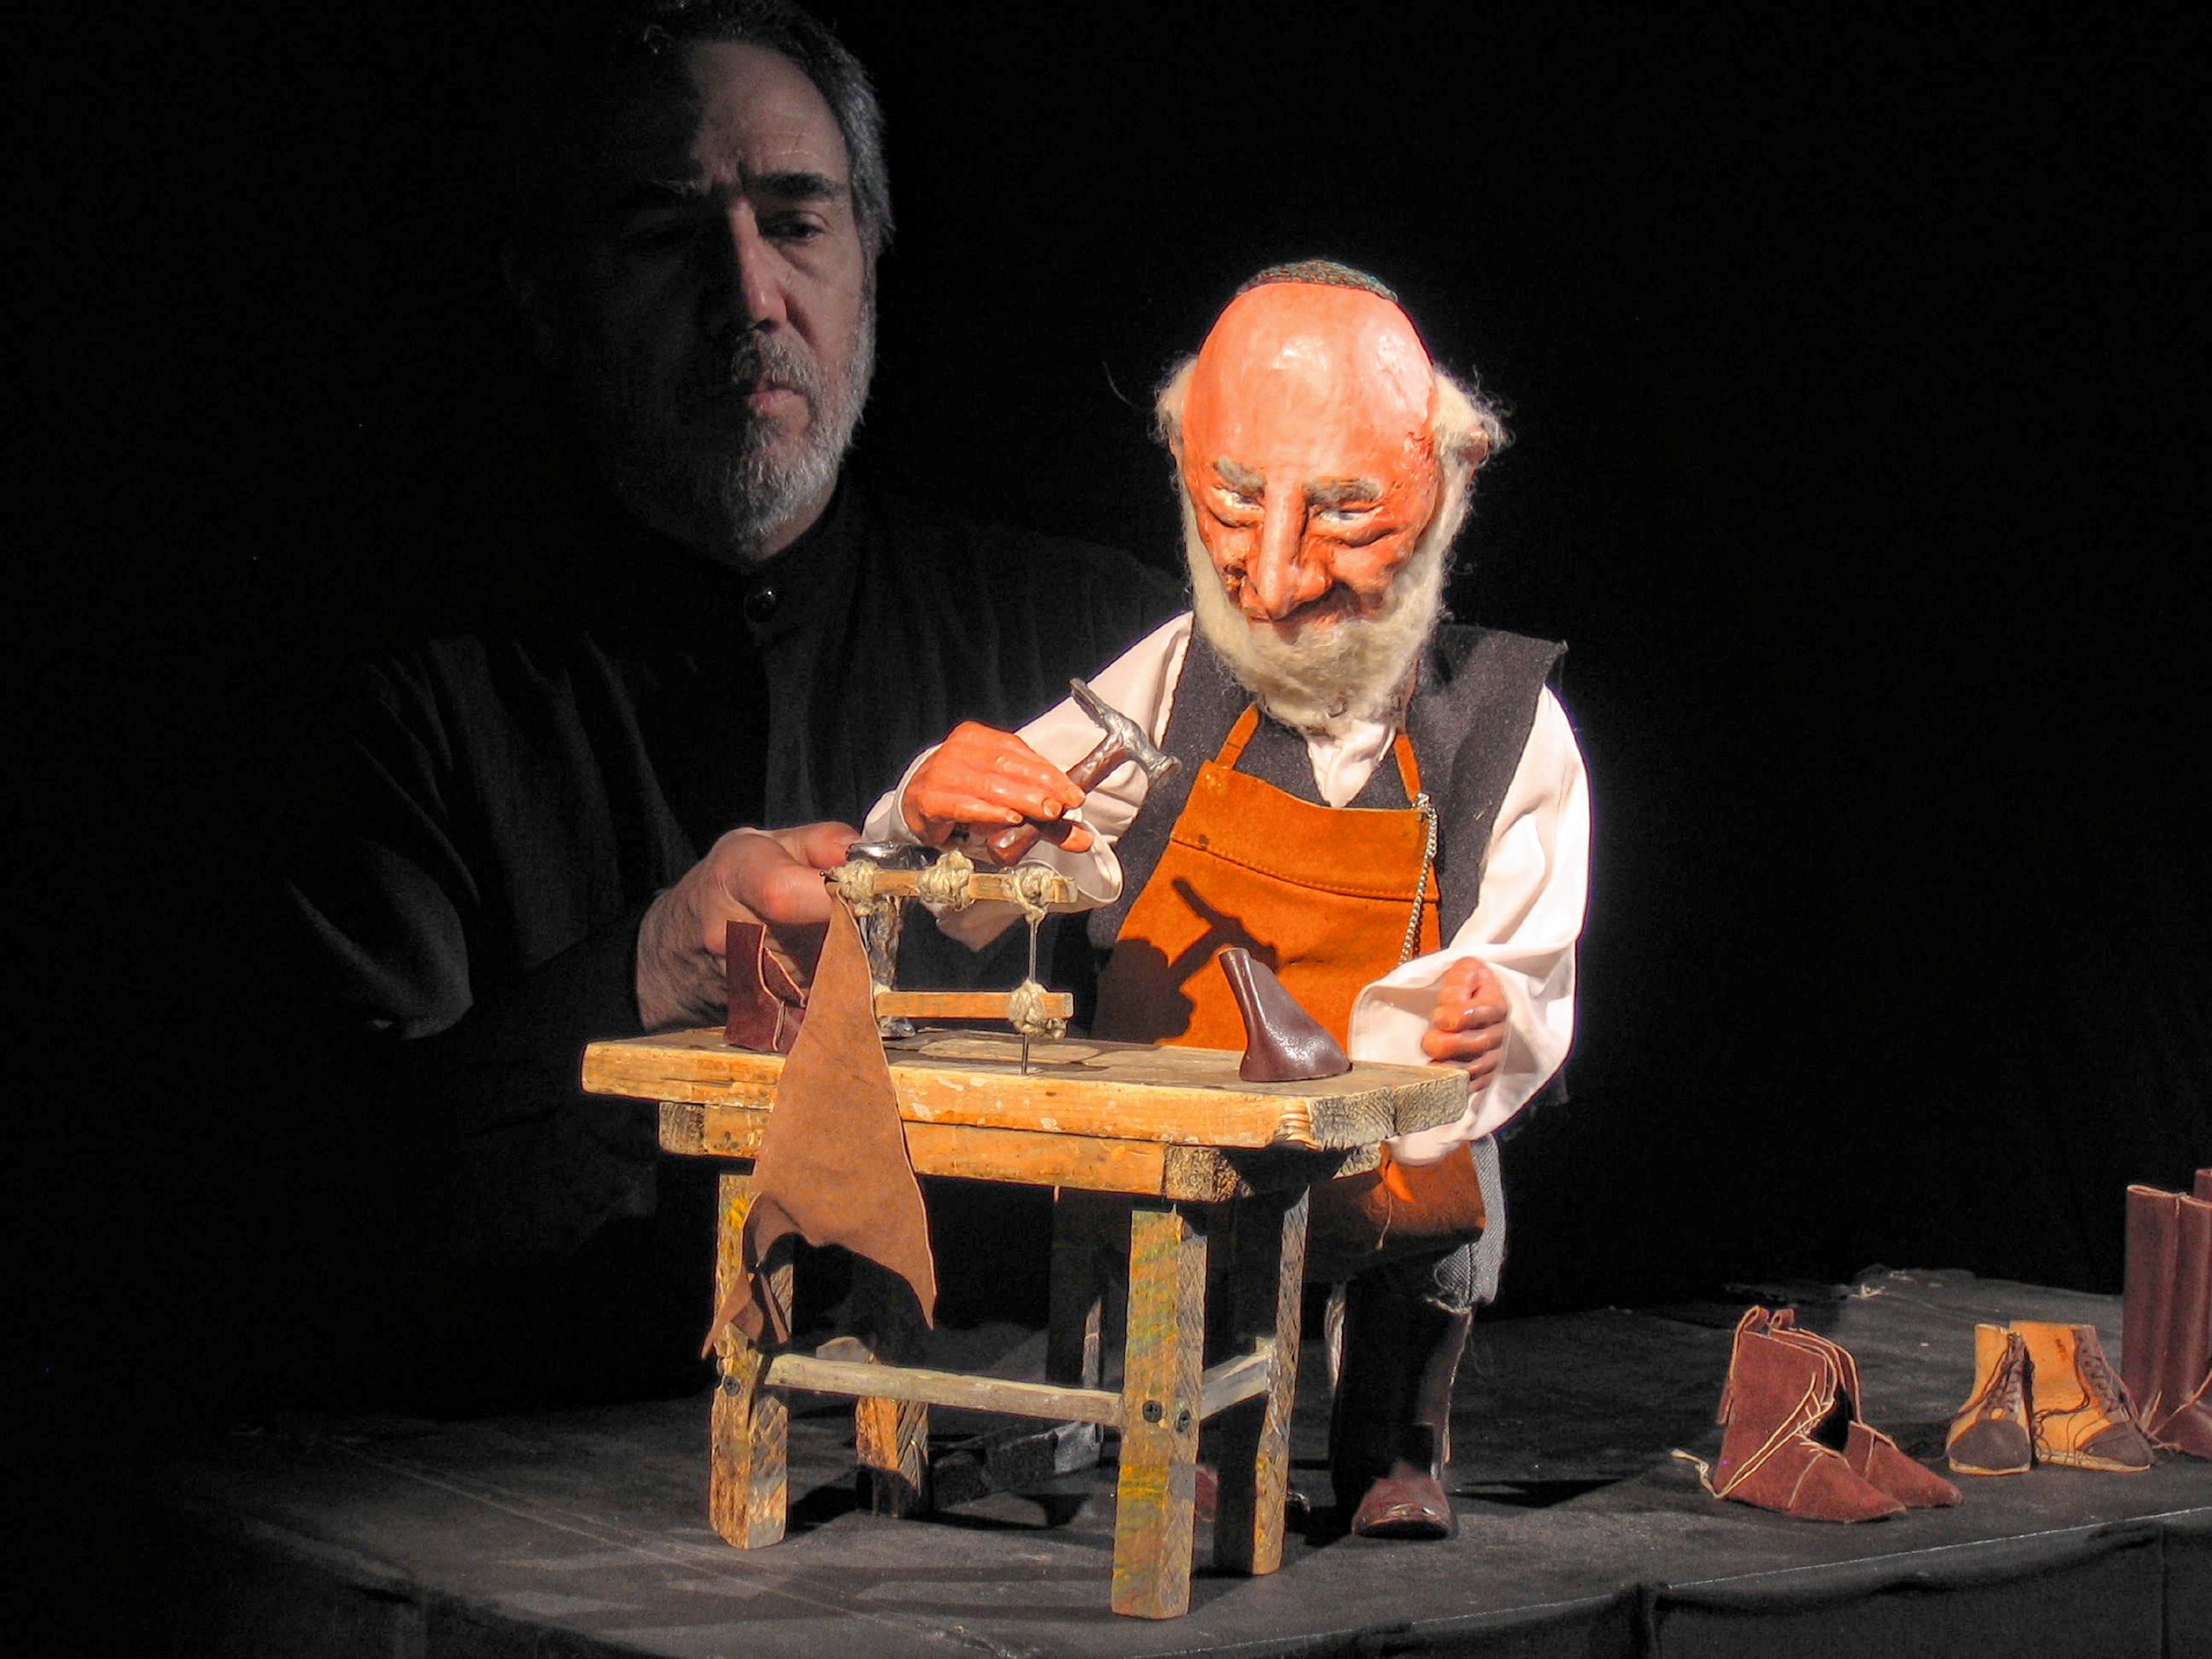 Stagestruck: Poetry, Puppetry and Attempted Murder